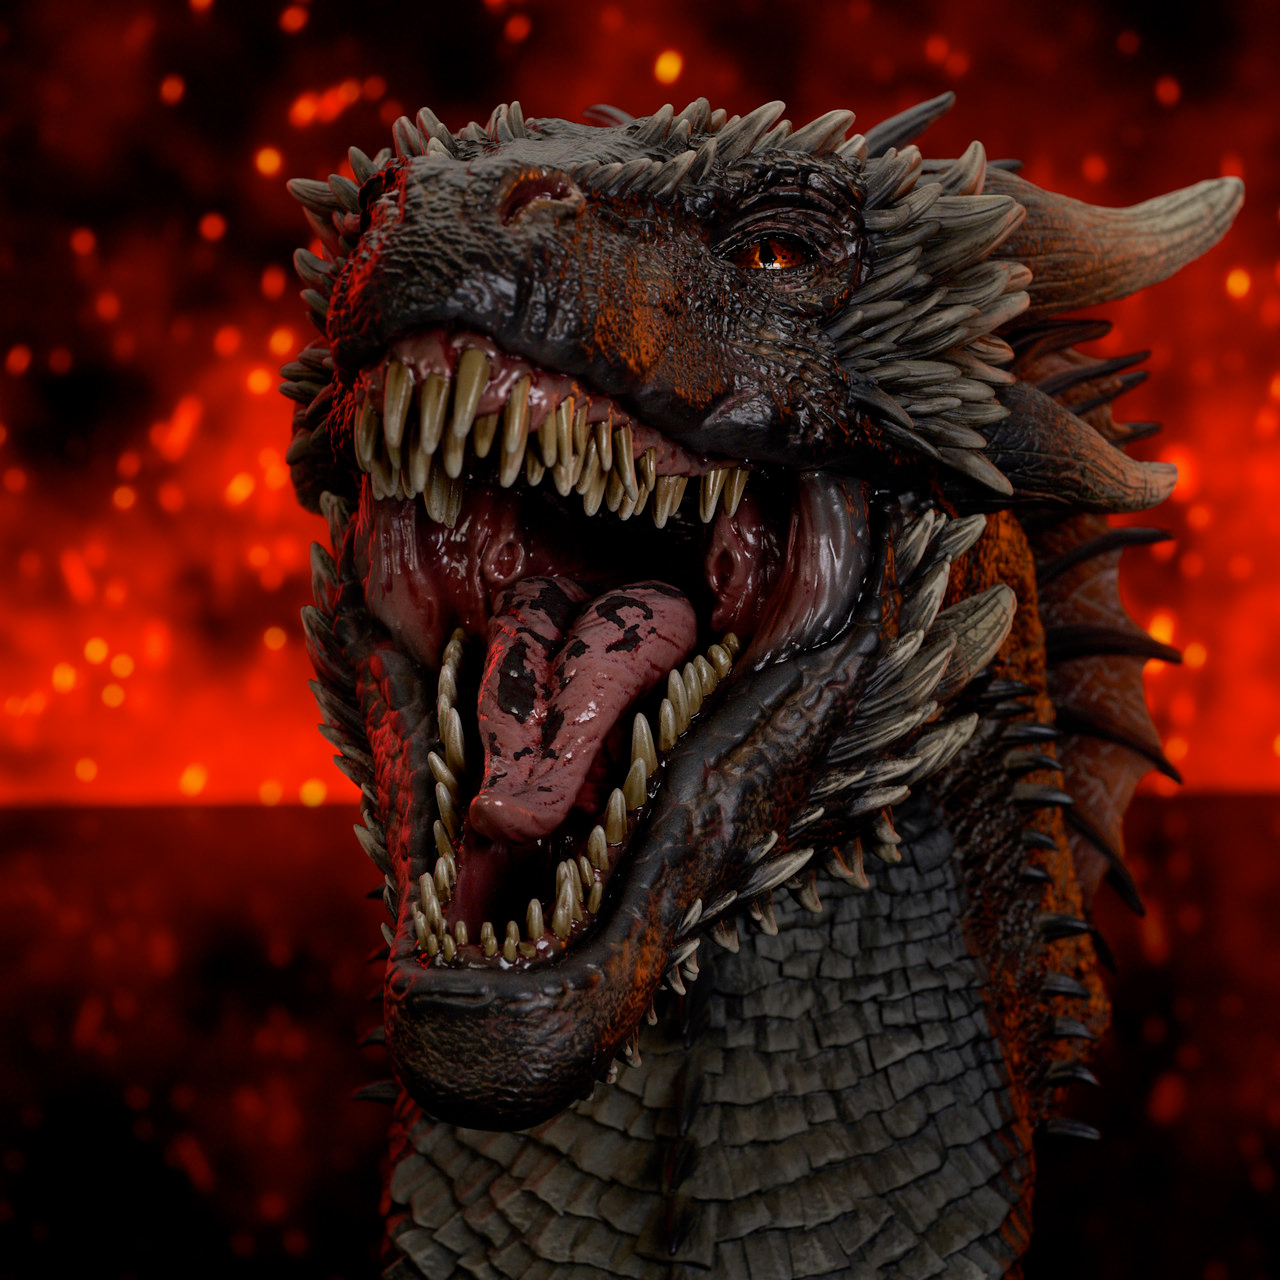 Drogon Legends in 3D Game of Thrones 1:2 Scale Bust